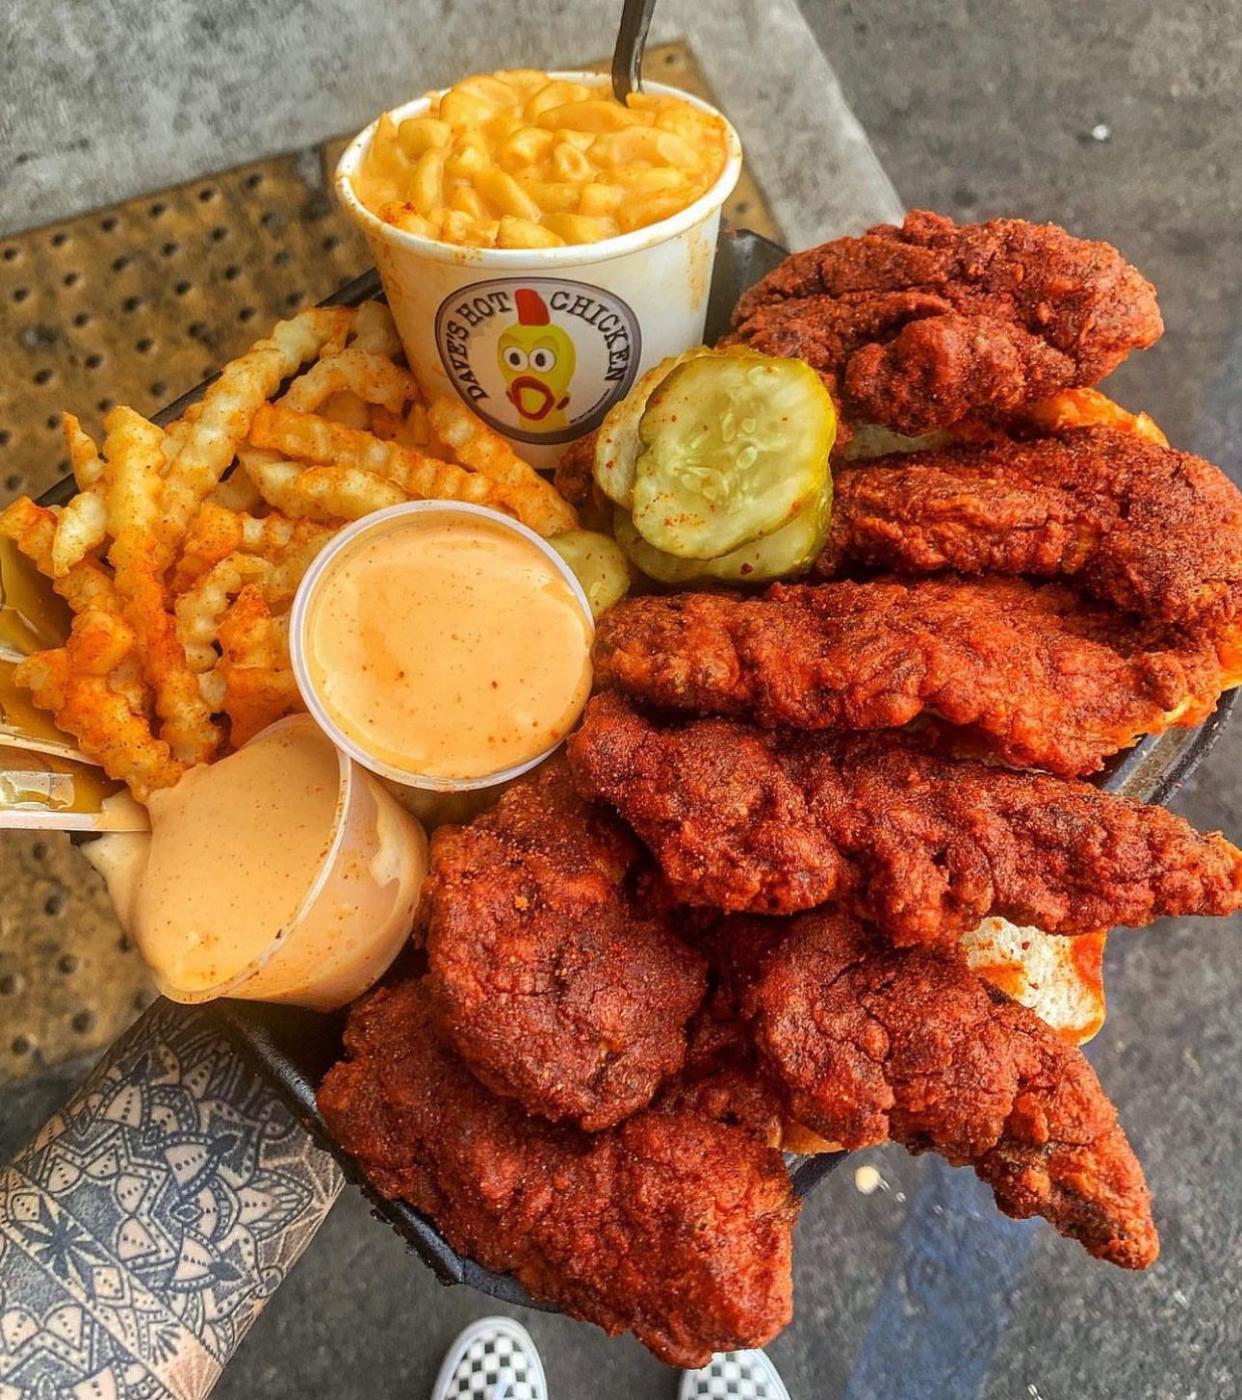 Dave's Hot Chicken will open its first Visalia location on Friday, March 24, 2023, bringing customers its simple menu of hot chicken tenders, slicers, fries, kale slaw and mac and cheese.